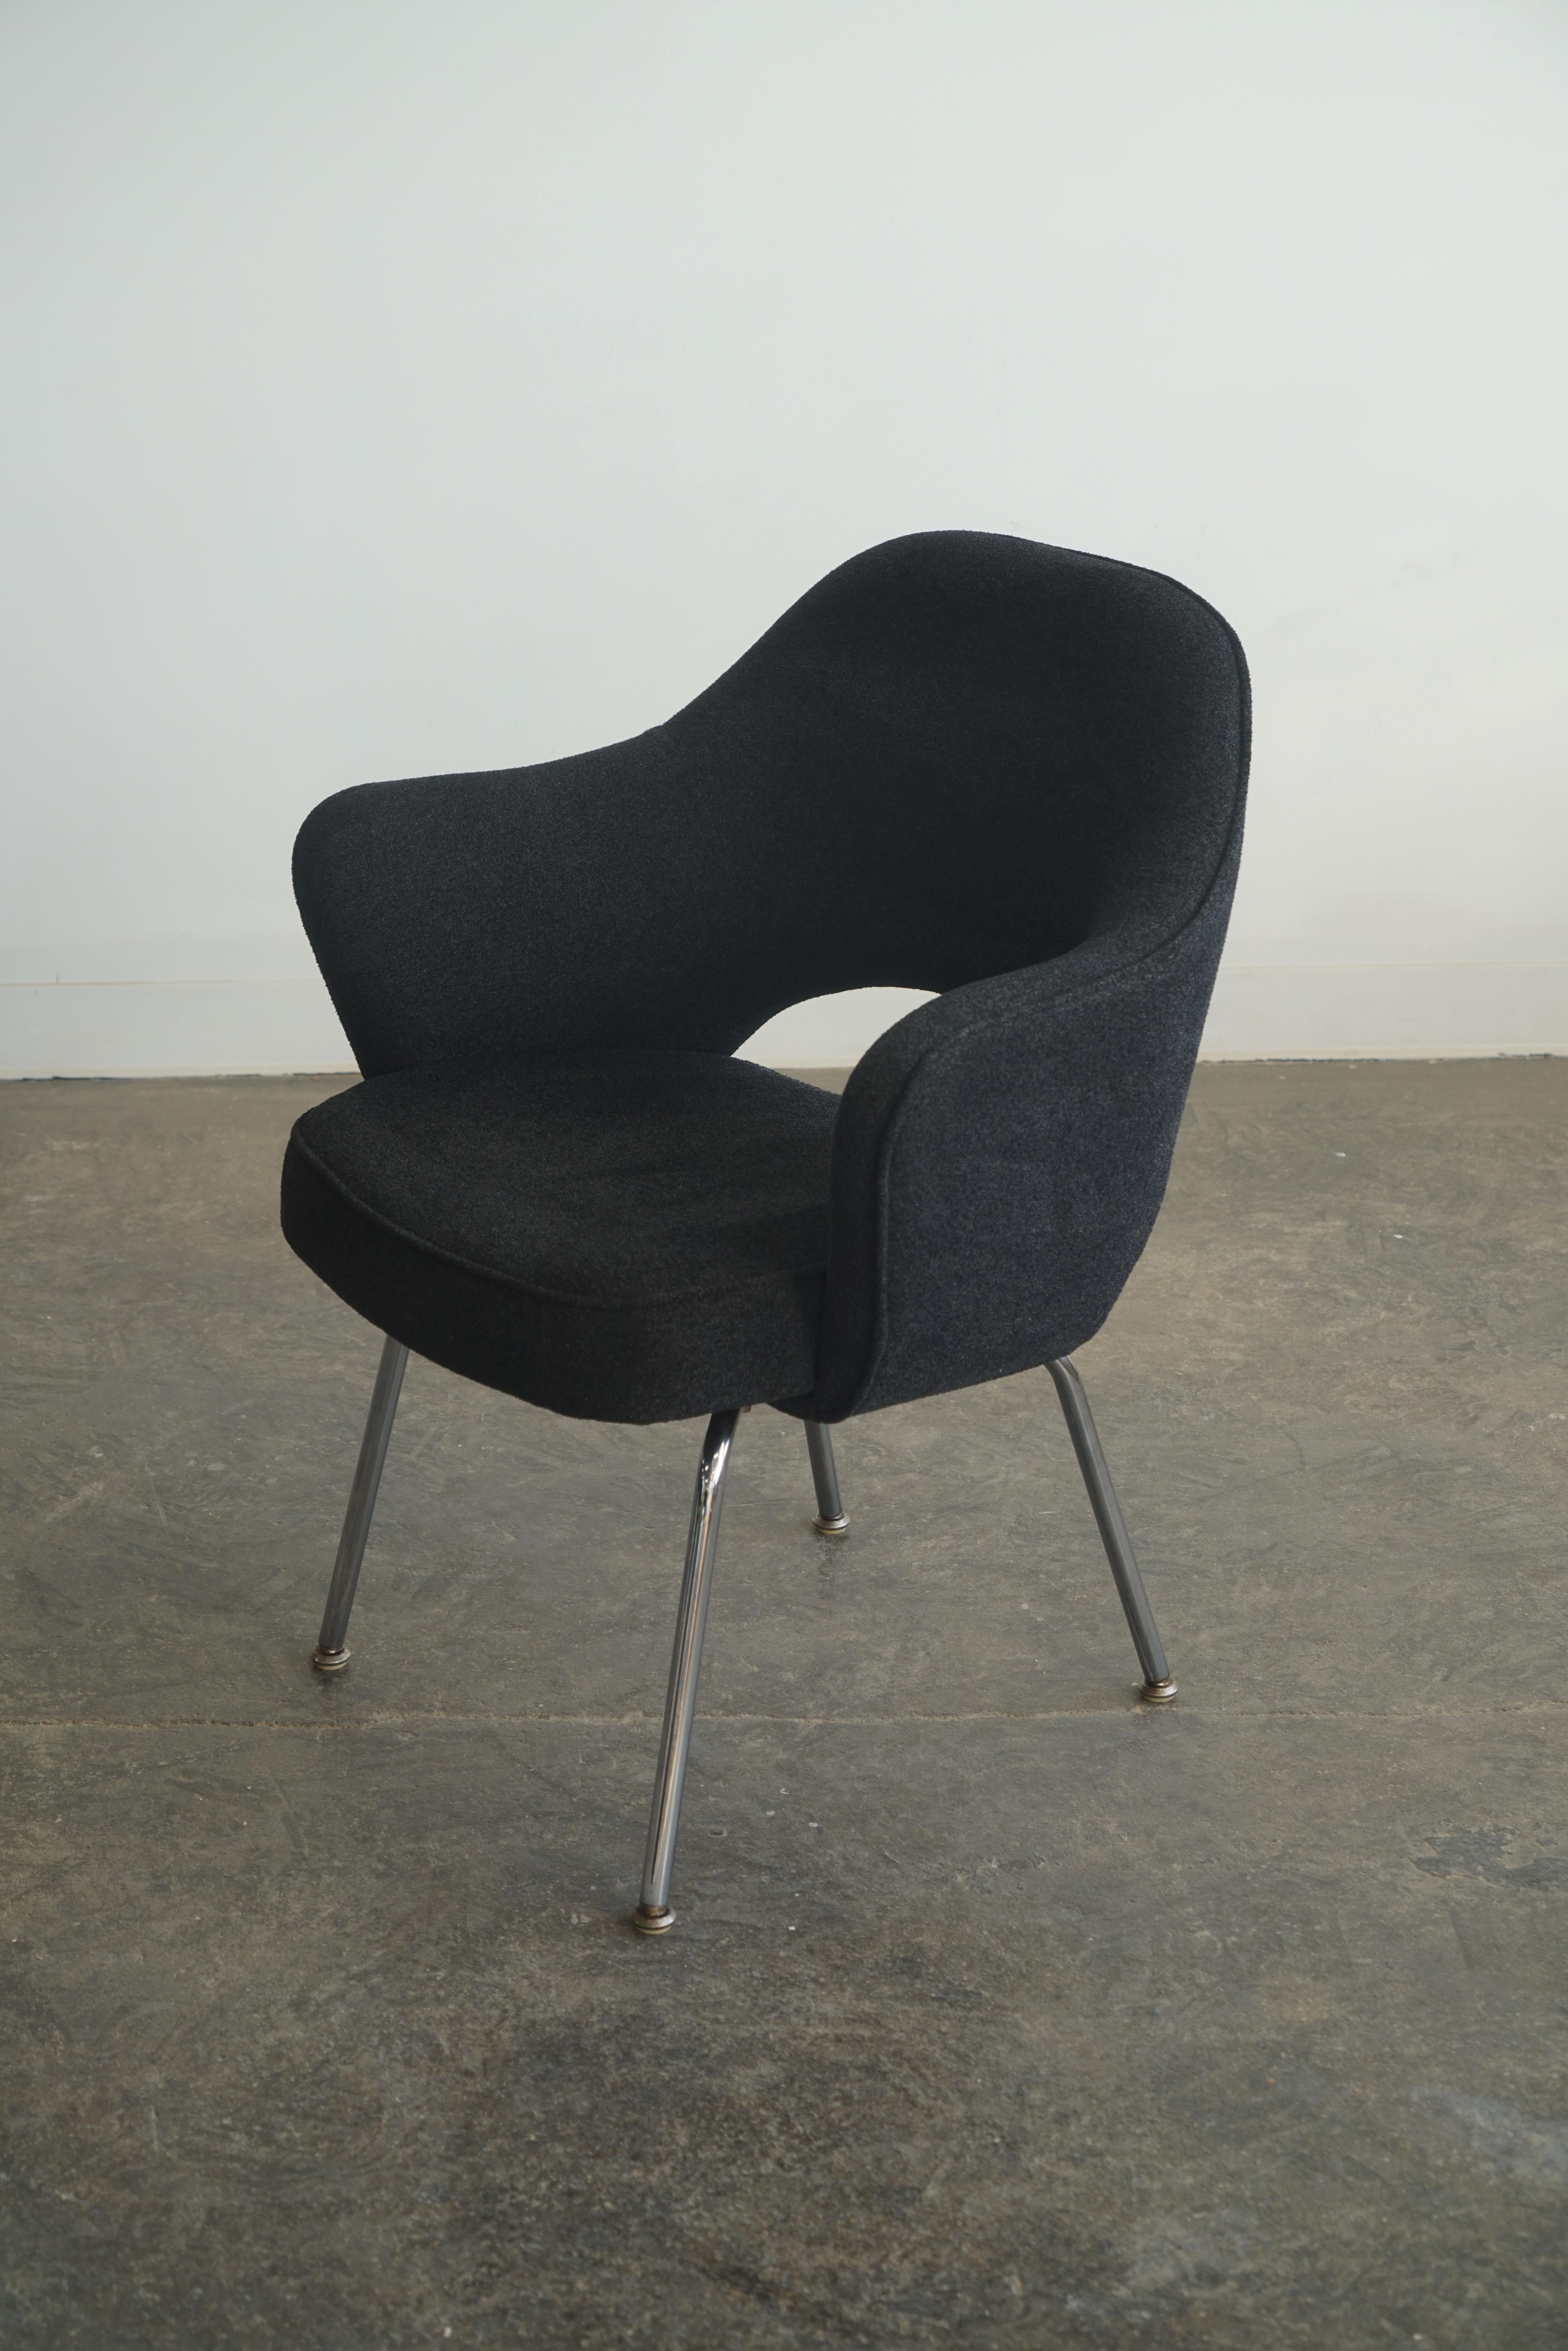 This for (1) Saarinen Executive Chair, armchair version.
Knoll, Circa 1985.
Black upholstery, chrome legs.

Priced individually. (4) available. 

Originally designed in 1946, these have been one of Knoll's most popular designs.

Condition:
Overall